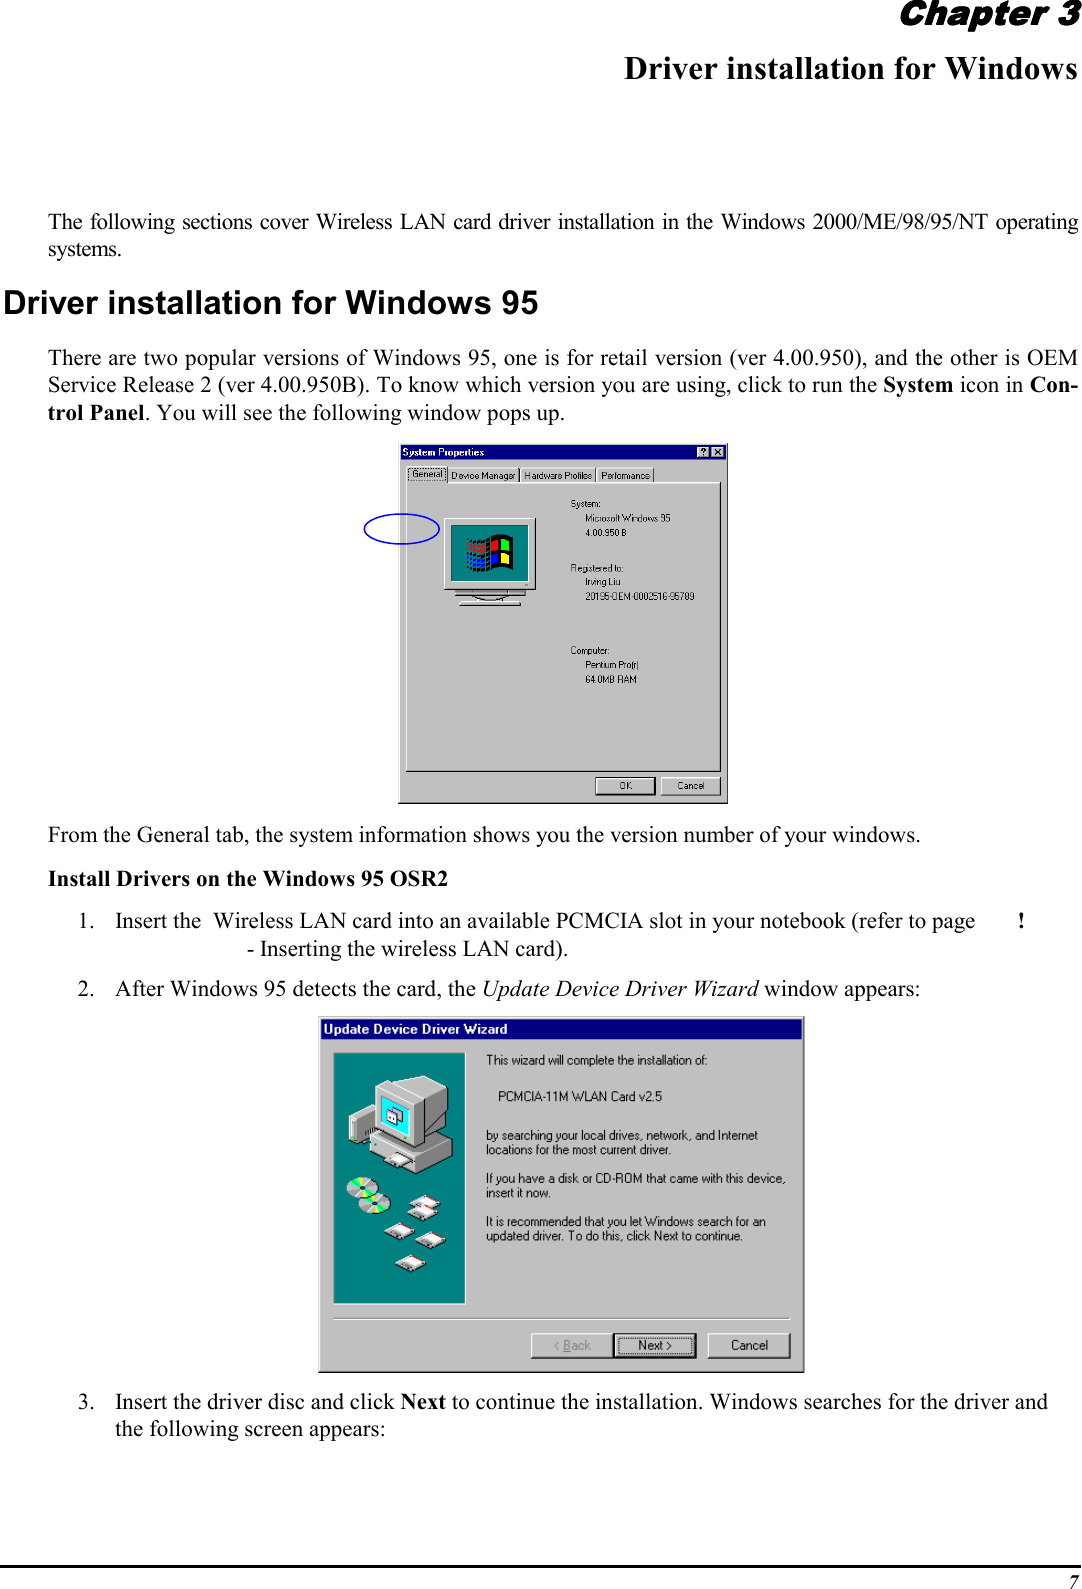 7Chapter 3Chapter 3Chapter 3Chapter 3Driver installation for WindowsThe following sections cover Wireless LAN card driver installation in the Windows 2000/ME/98/95/NT operatingsystems.Driver installation for Windows 95There are two popular versions of Windows 95, one is for retail version (ver 4.00.950), and the other is OEMService Release 2 (ver 4.00.950B). To know which version you are using, click to run the System icon in Con-trol Panel. You will see the following window pops up.From the General tab, the system information shows you the version number of your windows.Install Drivers on the Windows 95 OSR21. Insert the  Wireless LAN card into an available PCMCIA slot in your notebook (refer to page ! - Inserting the wireless LAN card).2. After Windows 95 detects the card, the Update Device Driver Wizard window appears:3. Insert the driver disc and click Next to continue the installation. Windows searches for the driver andthe following screen appears: